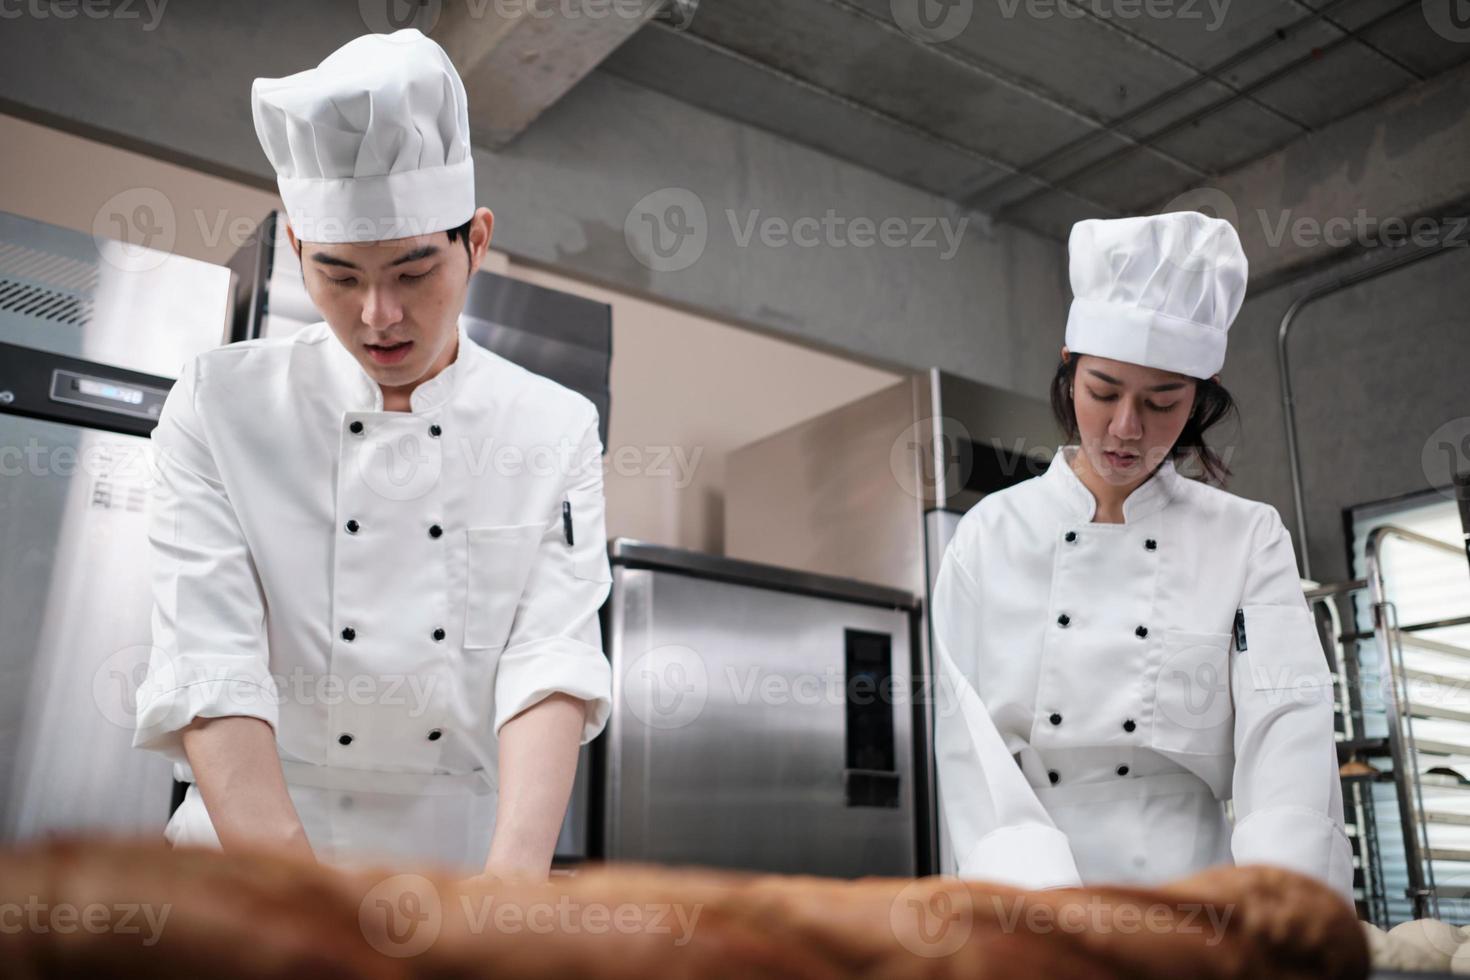 Two professional Asian chefs in white cook uniforms and aprons knead pastry dough and eggs, prepare bread, cookies, and fresh bakery food, baking in an oven in a restaurant stainless steel kitchen. photo